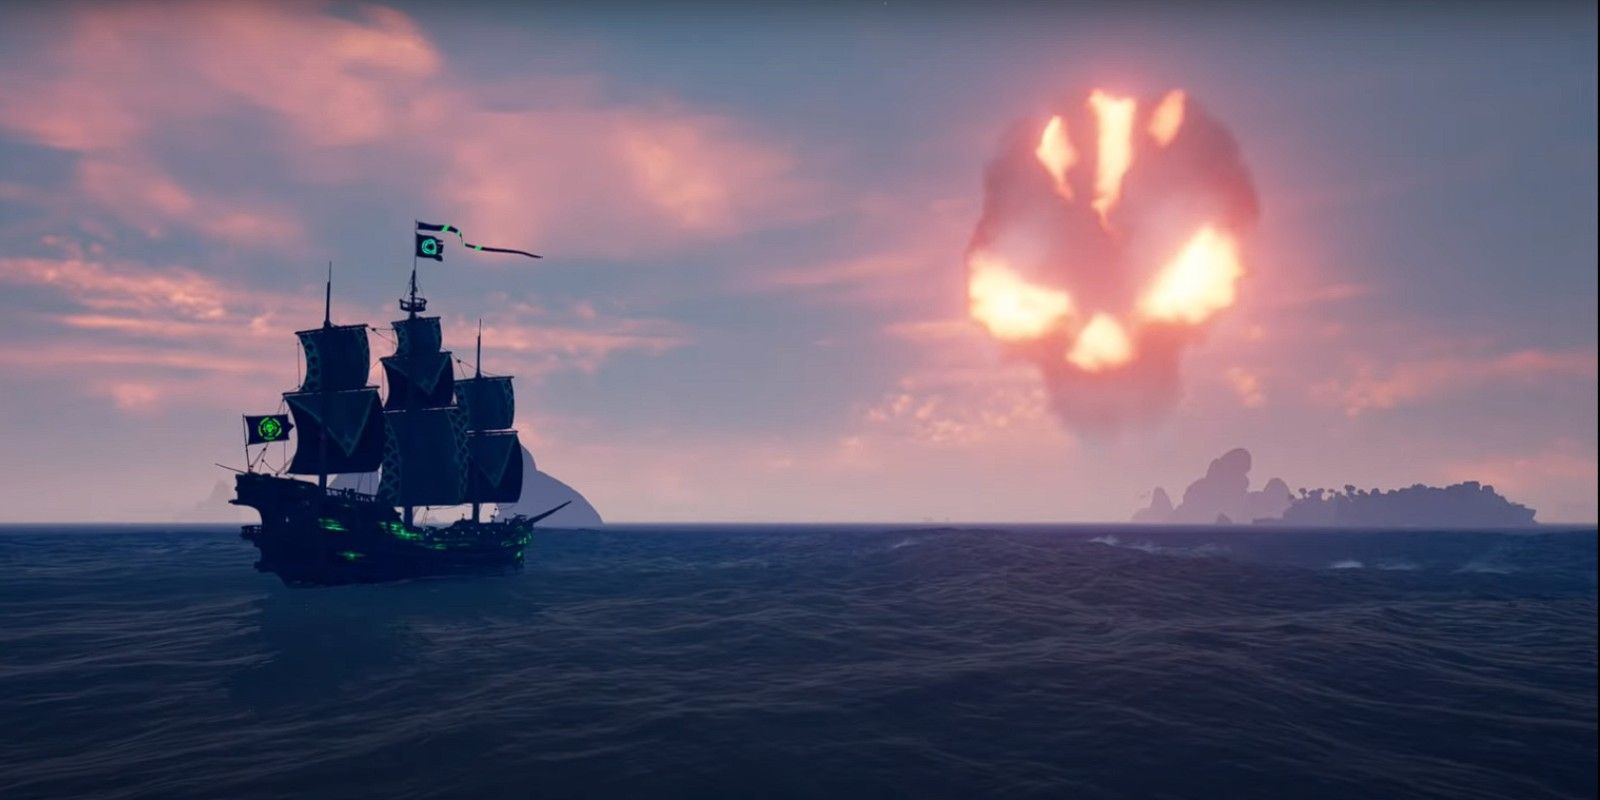 Sea of Thieves: Where to Find Resource Crates (& What They’re For)